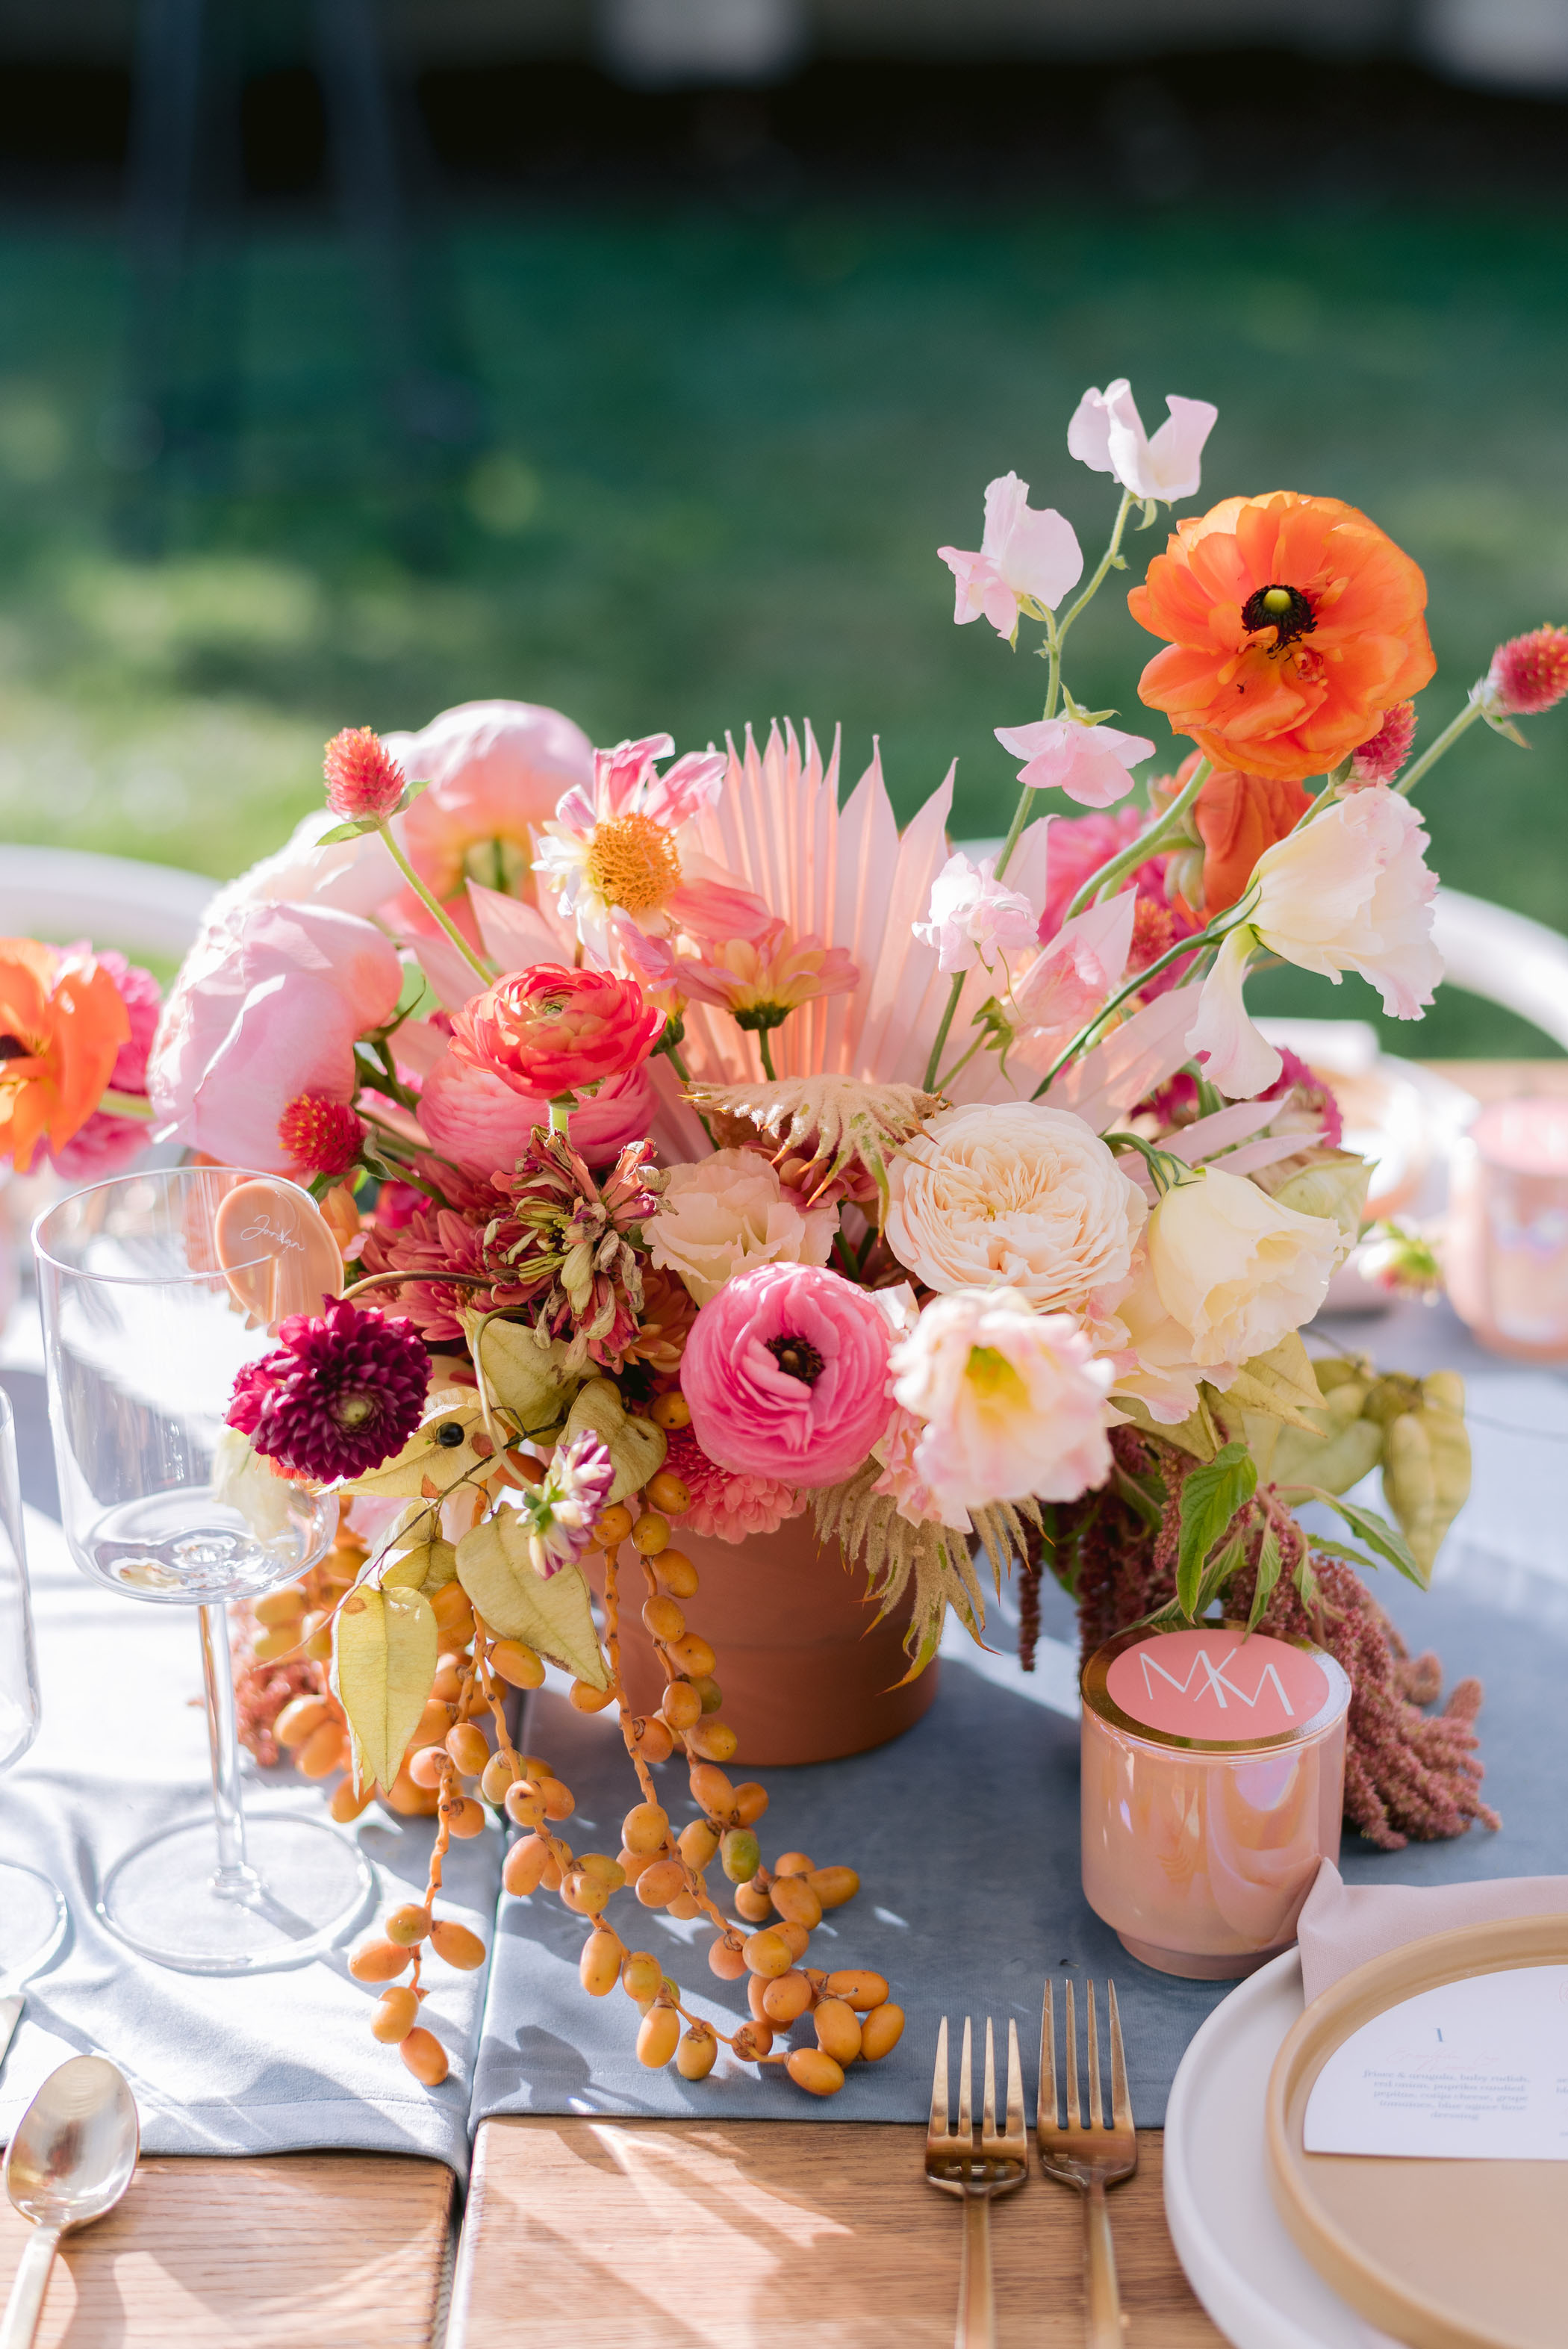 pink and orange floral centerpiece display for housewarming party table